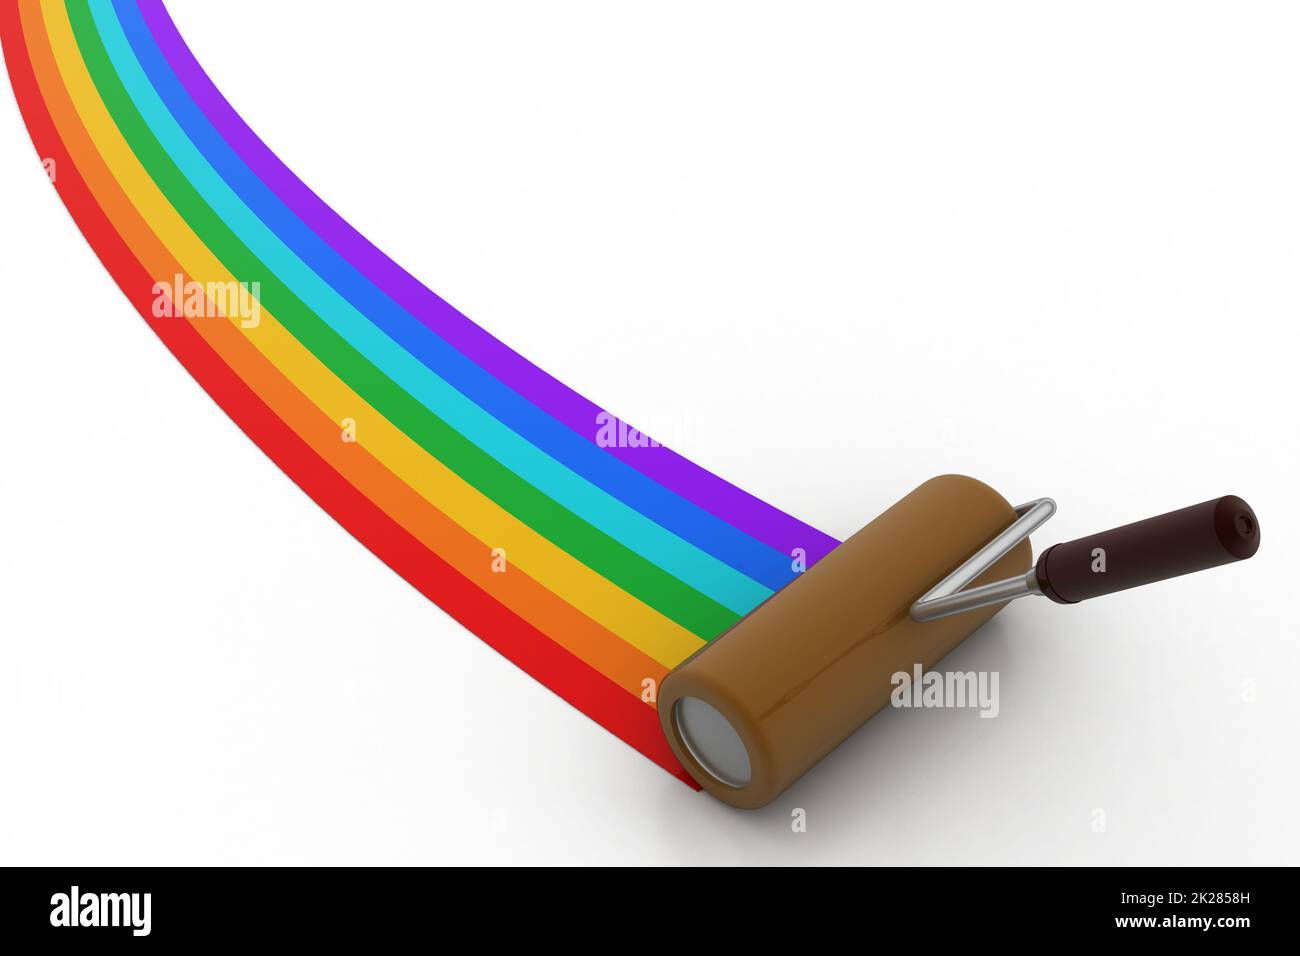 Rainbow color painting by roller brush Stock Photo